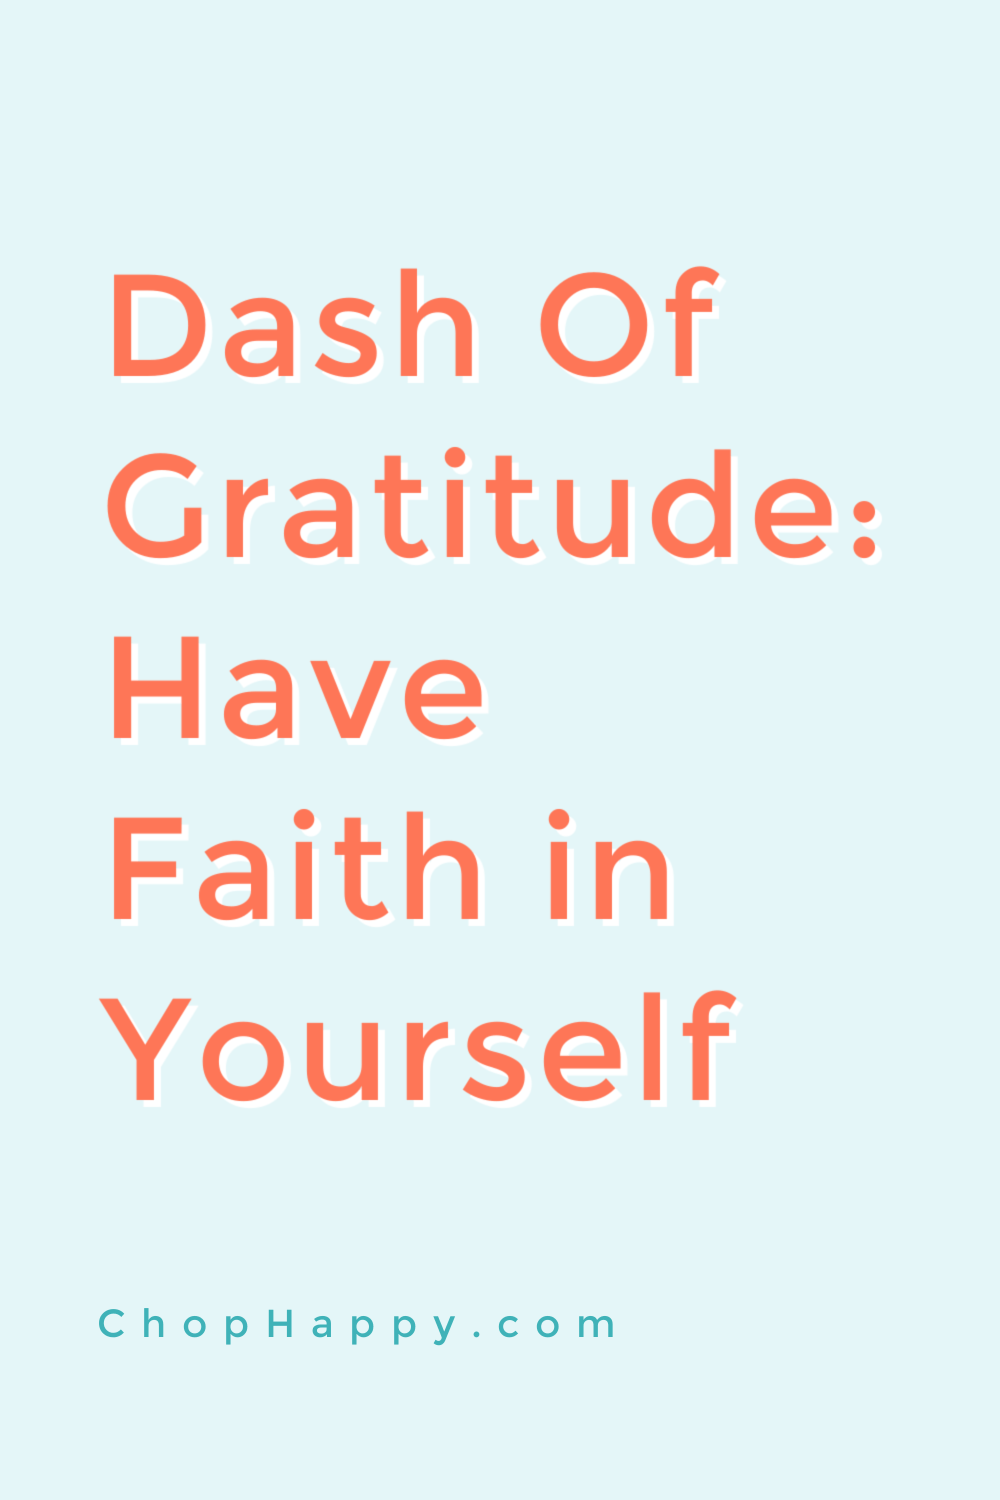 Dash of Gratitude: Have Faith in Yourself! When we bought ourselves we need to see that an attitude of gratitude and faith gets us closer to our dreams. Happy Manifesting! www.ChopHappy.com #gratitude #faith